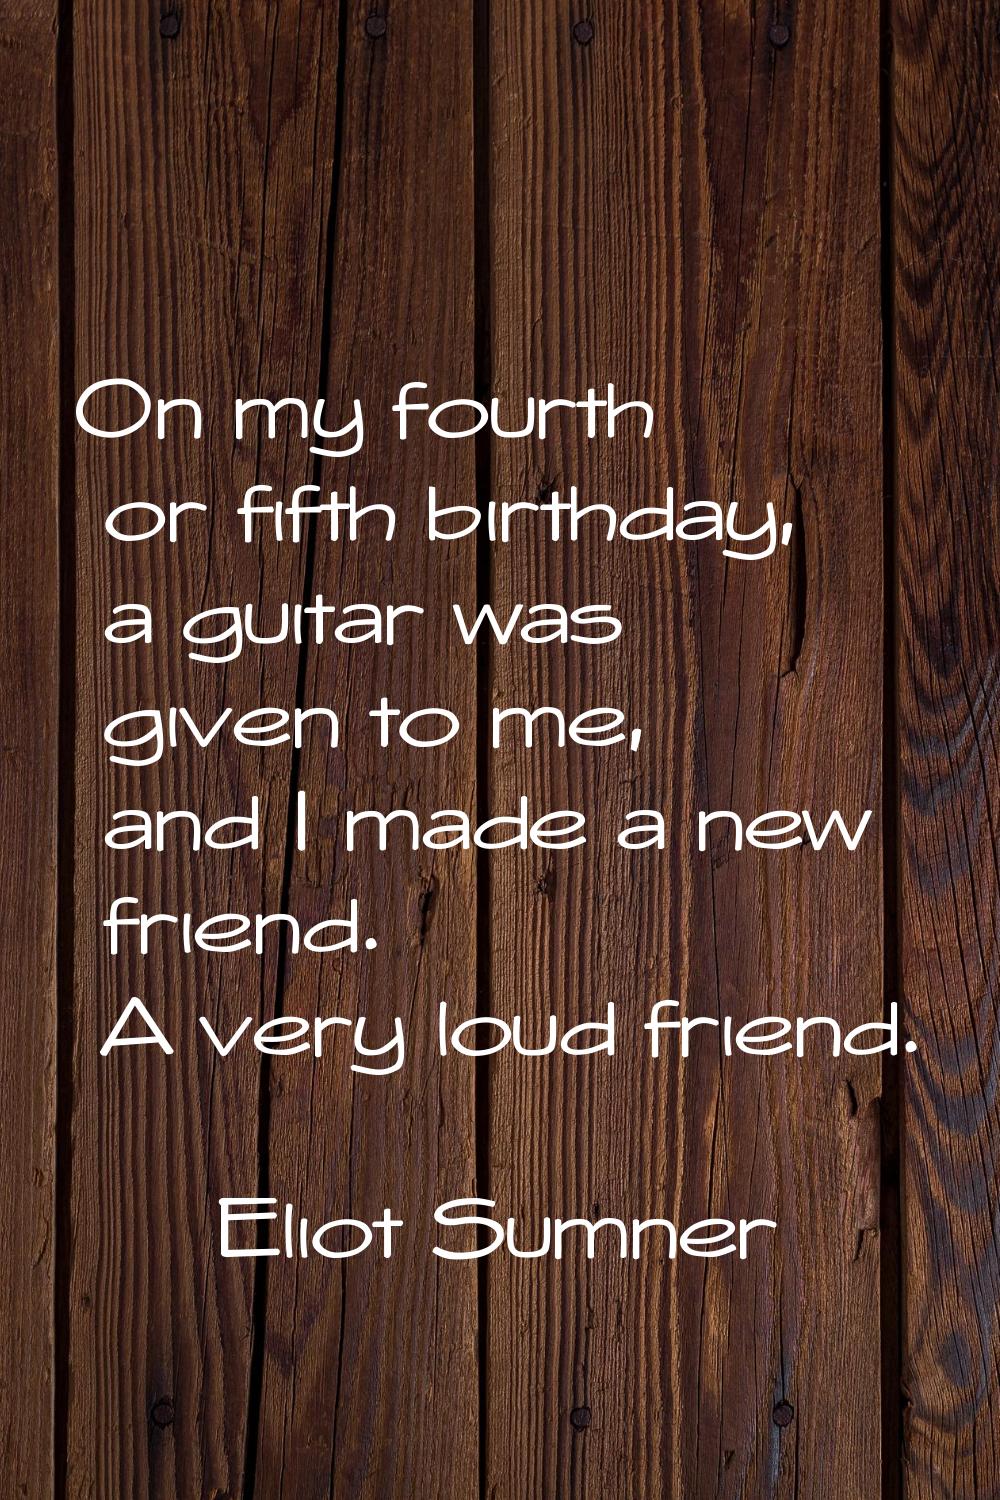 On my fourth or fifth birthday, a guitar was given to me, and I made a new friend. A very loud frie